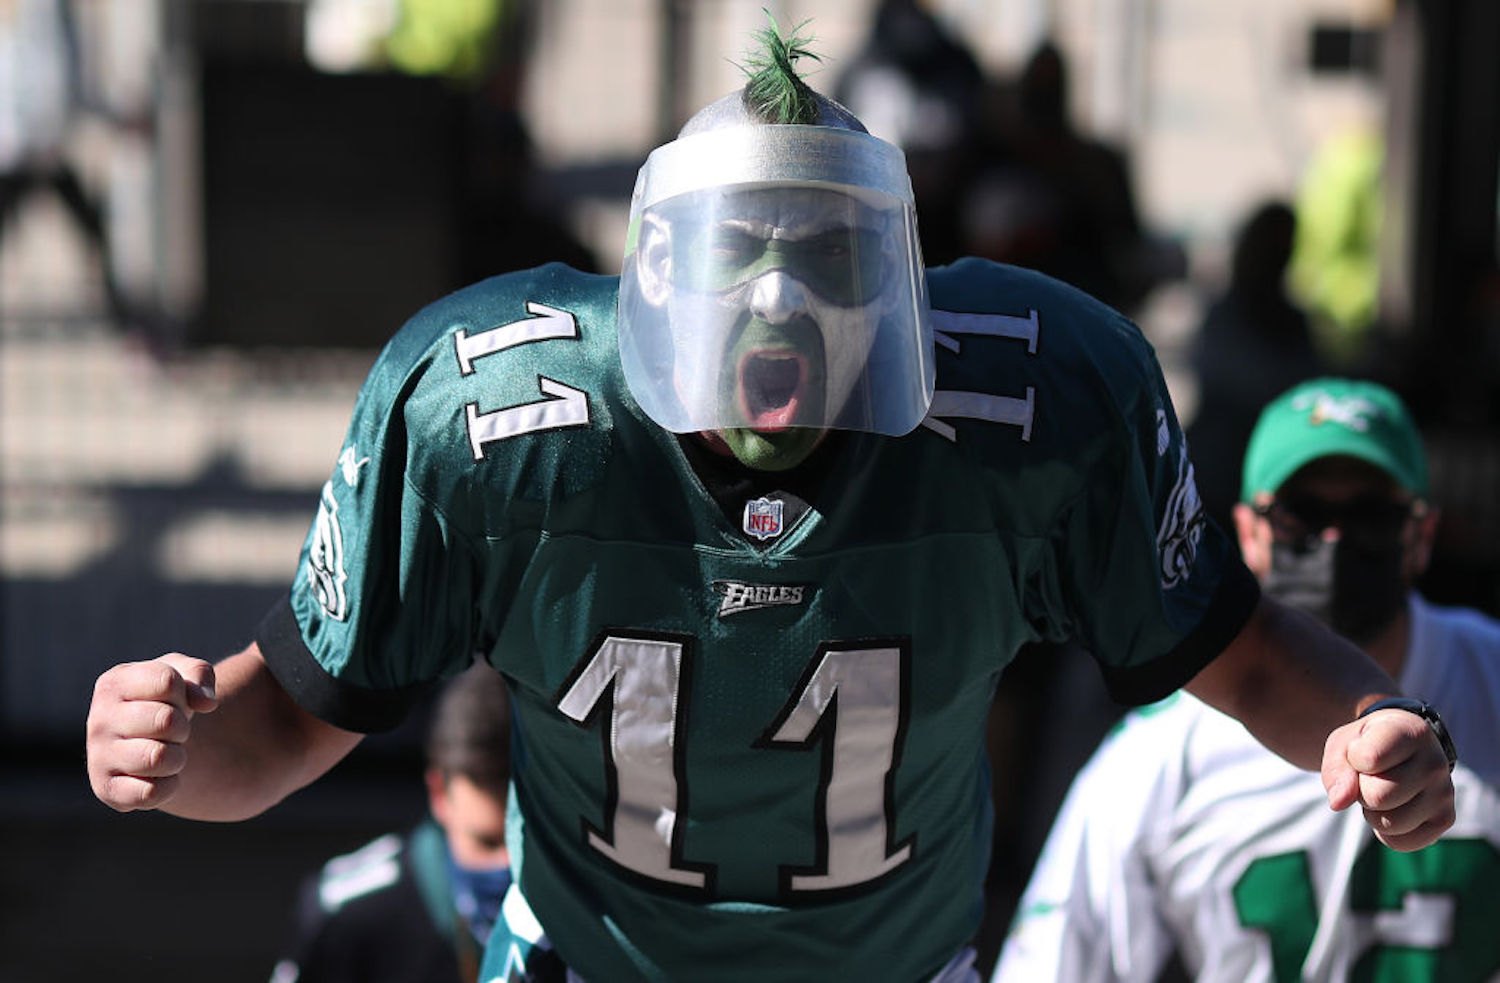 The Philadelphia Eagles allowed fans in their staidium on Sunday for the first time this season, so they naturally got into a brawl.